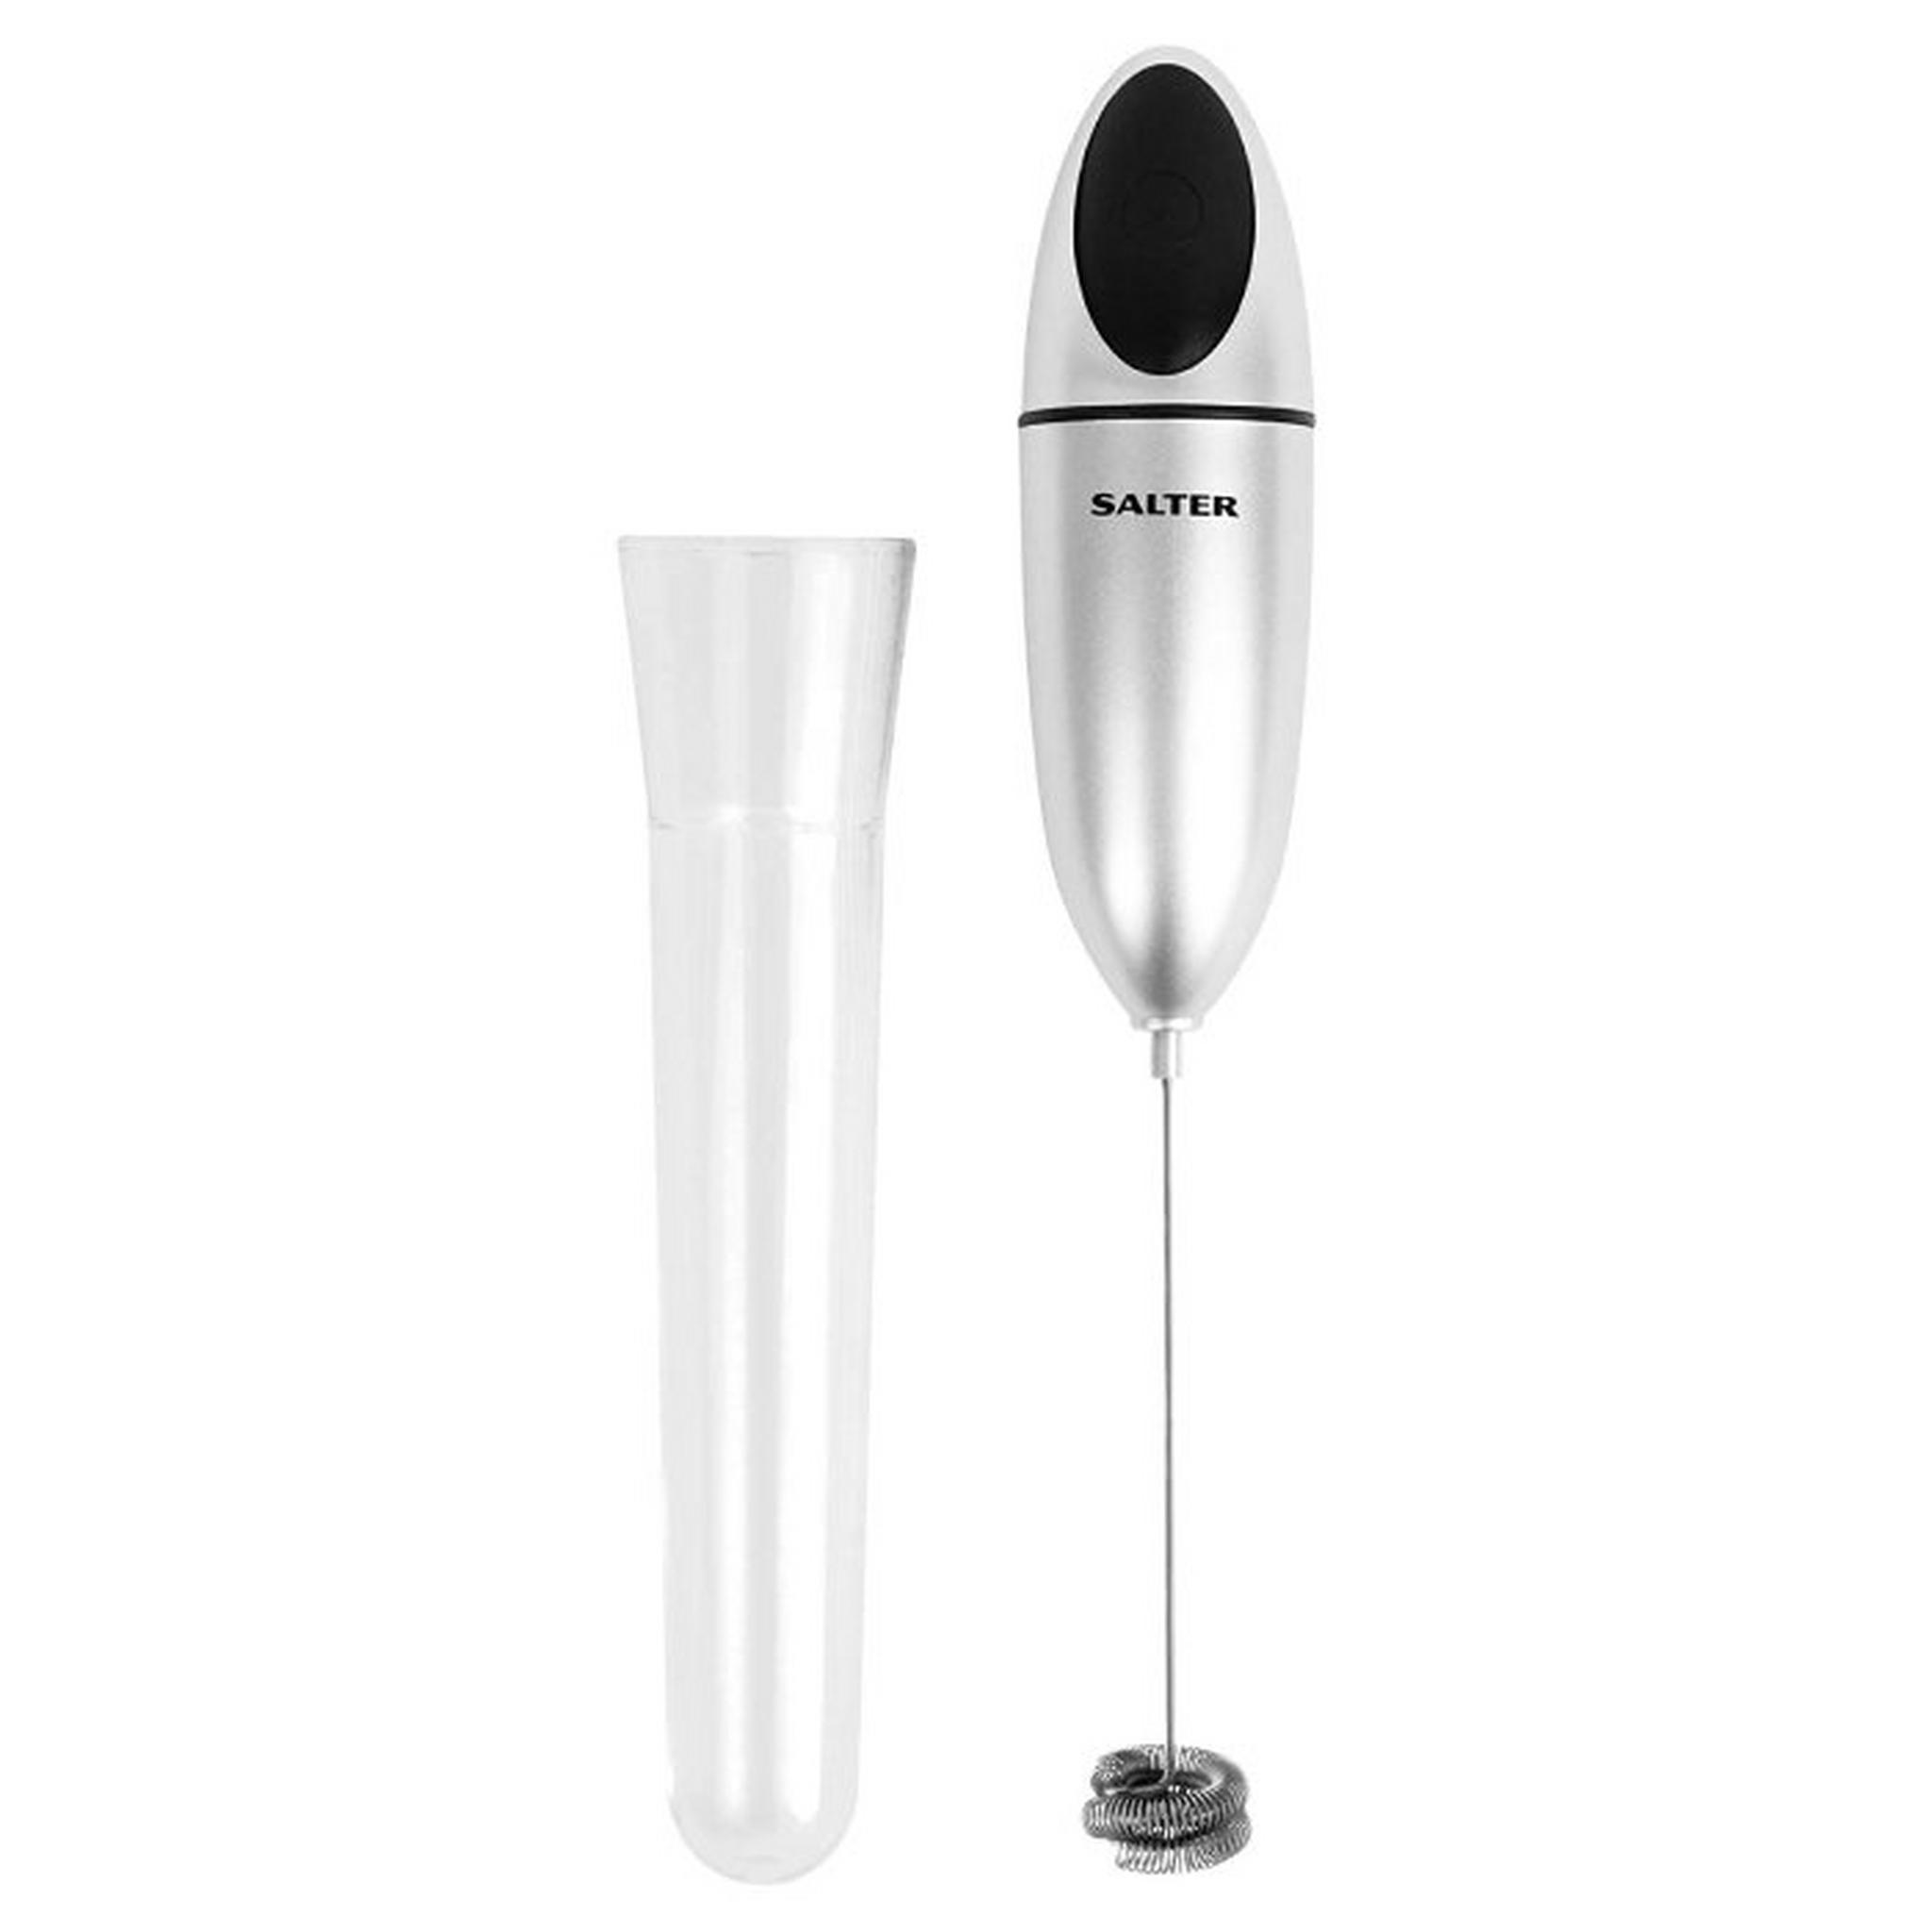 Handheld Electronic Milk Frother with Double Coil Whisk, 546 CRXR - Silver